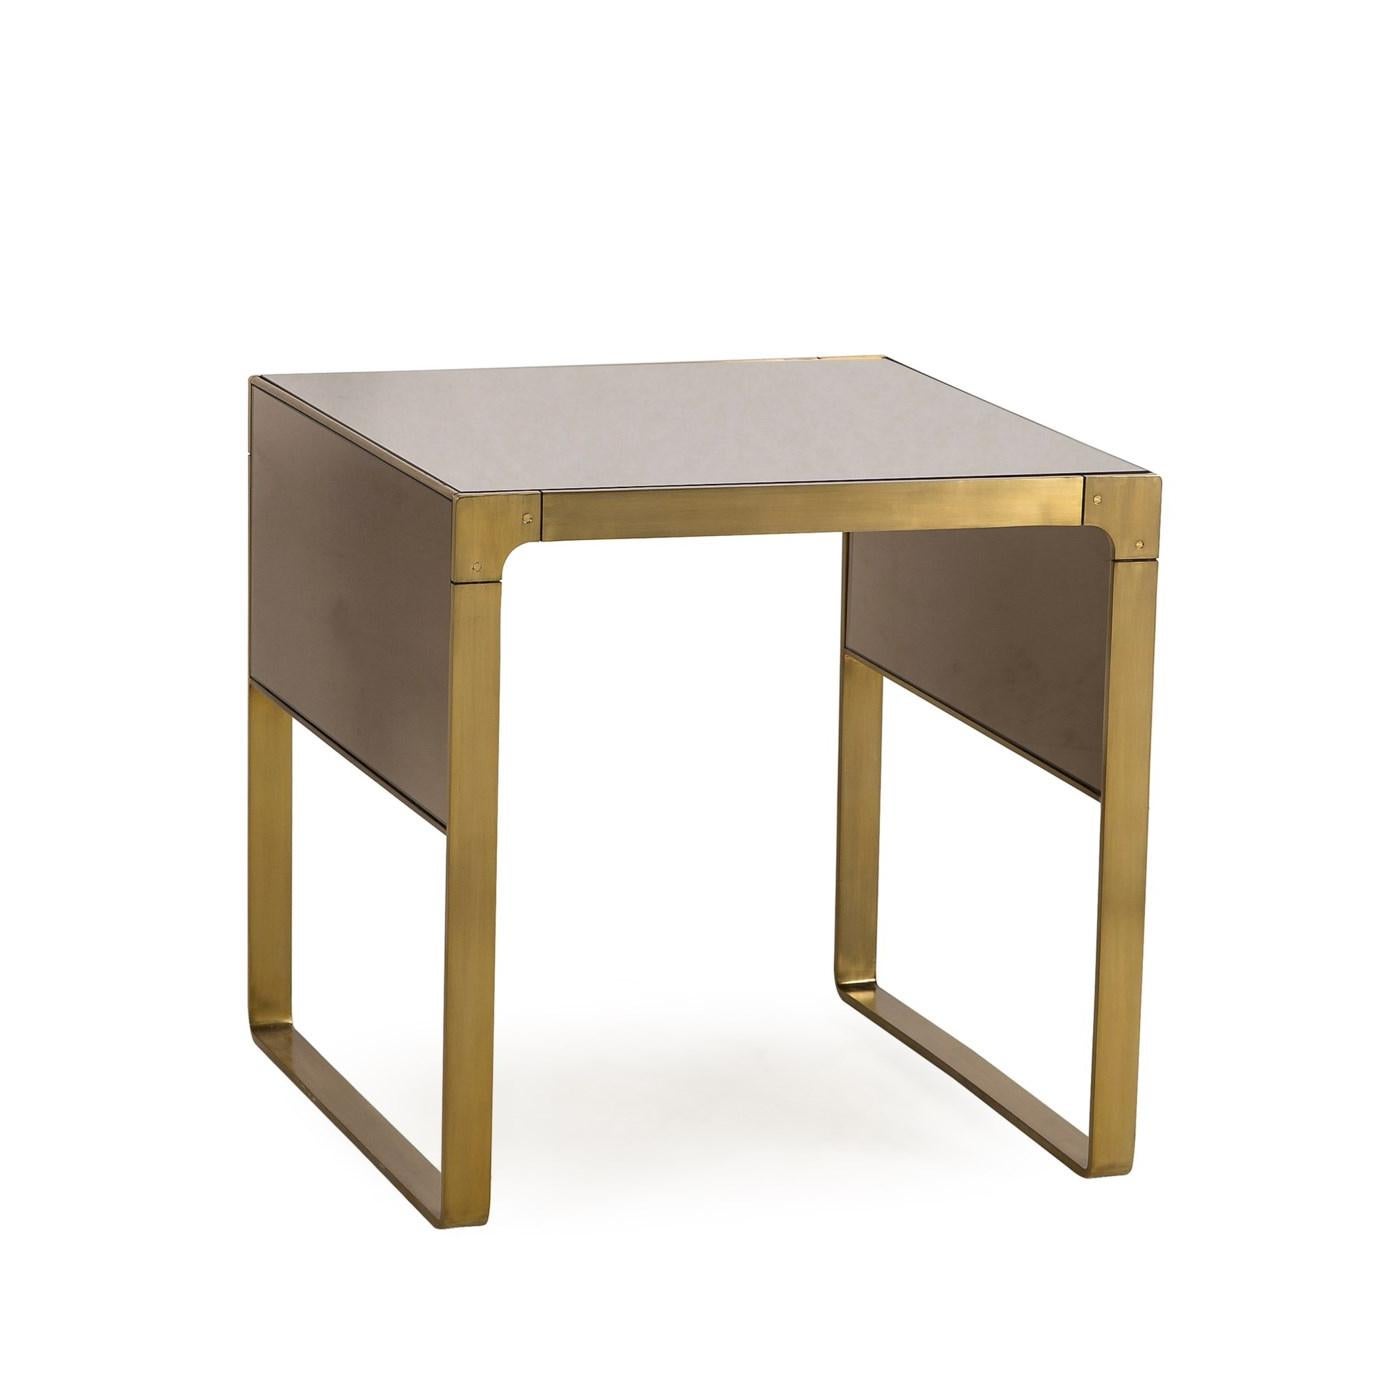 Side table Sturdy with structure in 
polished stainless steel in satin brass 
finish. With smoked glass top in bronze 
finish. Also available in sturdy console 
table and sturdy coffee table.